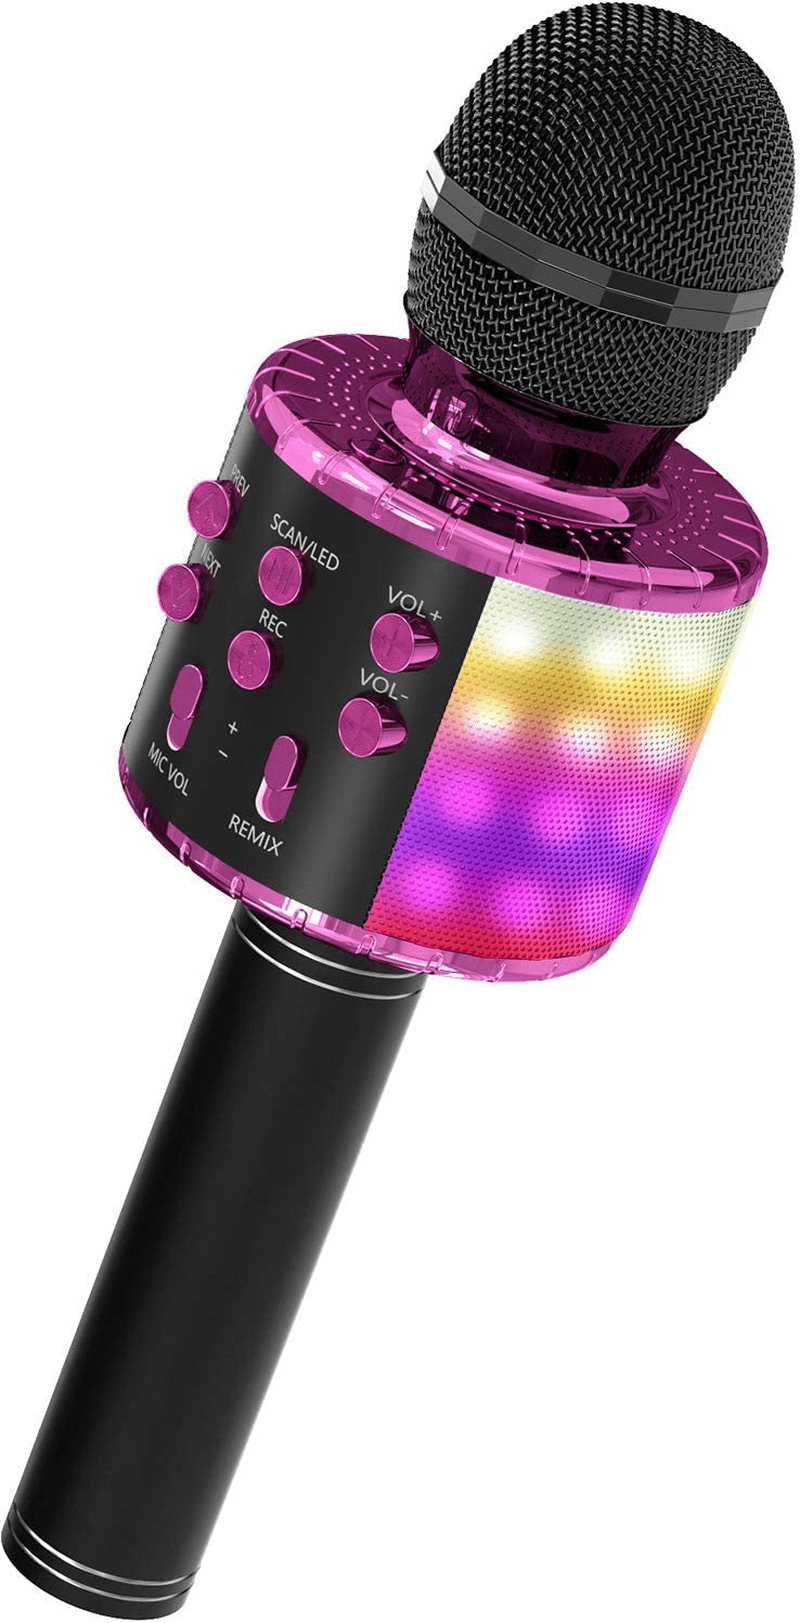 OVELLIC Karaoke Microphone for Kids, Wireless Bluetooth Karaoke Microphone with LED Lights, Portable Handheld Mic Speaker Machine, Great Gifts Toys for Girls Boys Adults All Age (Rose Gold) Electronics > Audio > Audio Components > Microphones OVELLIC Black Purple  